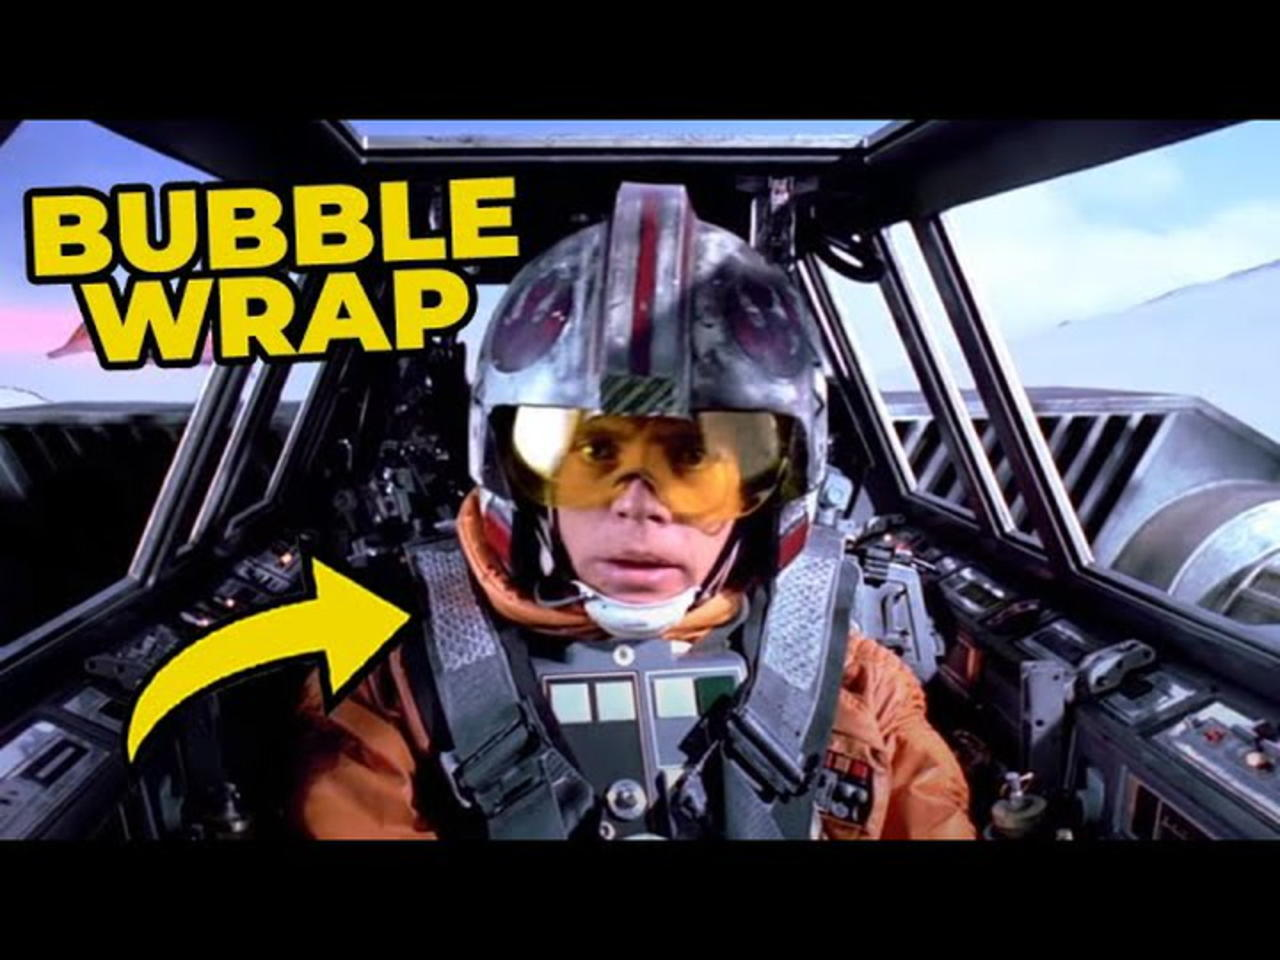 20 Things You Somehow Missed In Star Wars: Episode V - The Empire Strikes Back